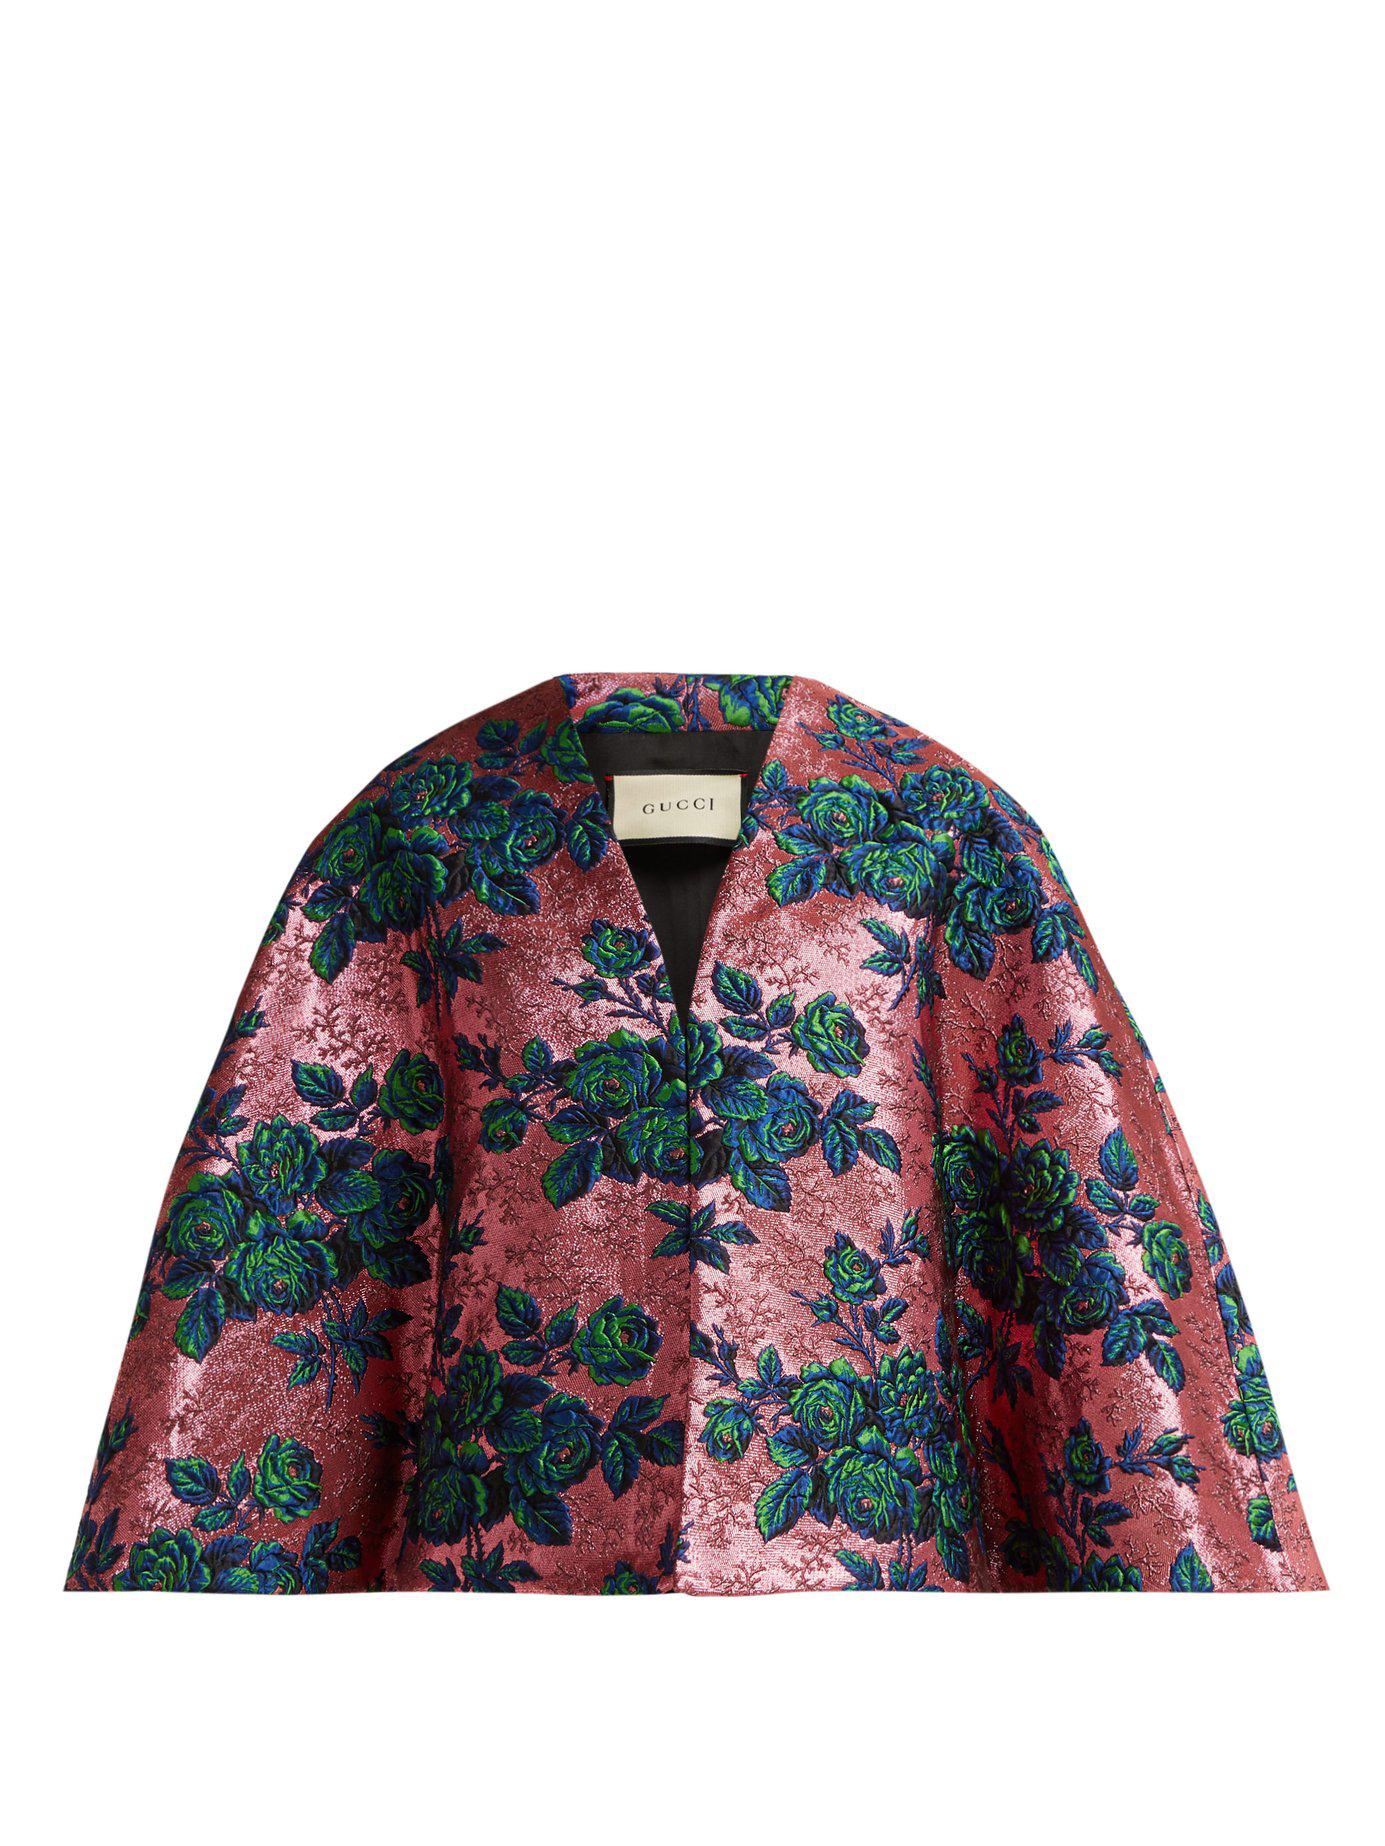 Gucci Floral Metallic Brocade Cape in Pink | Lyst